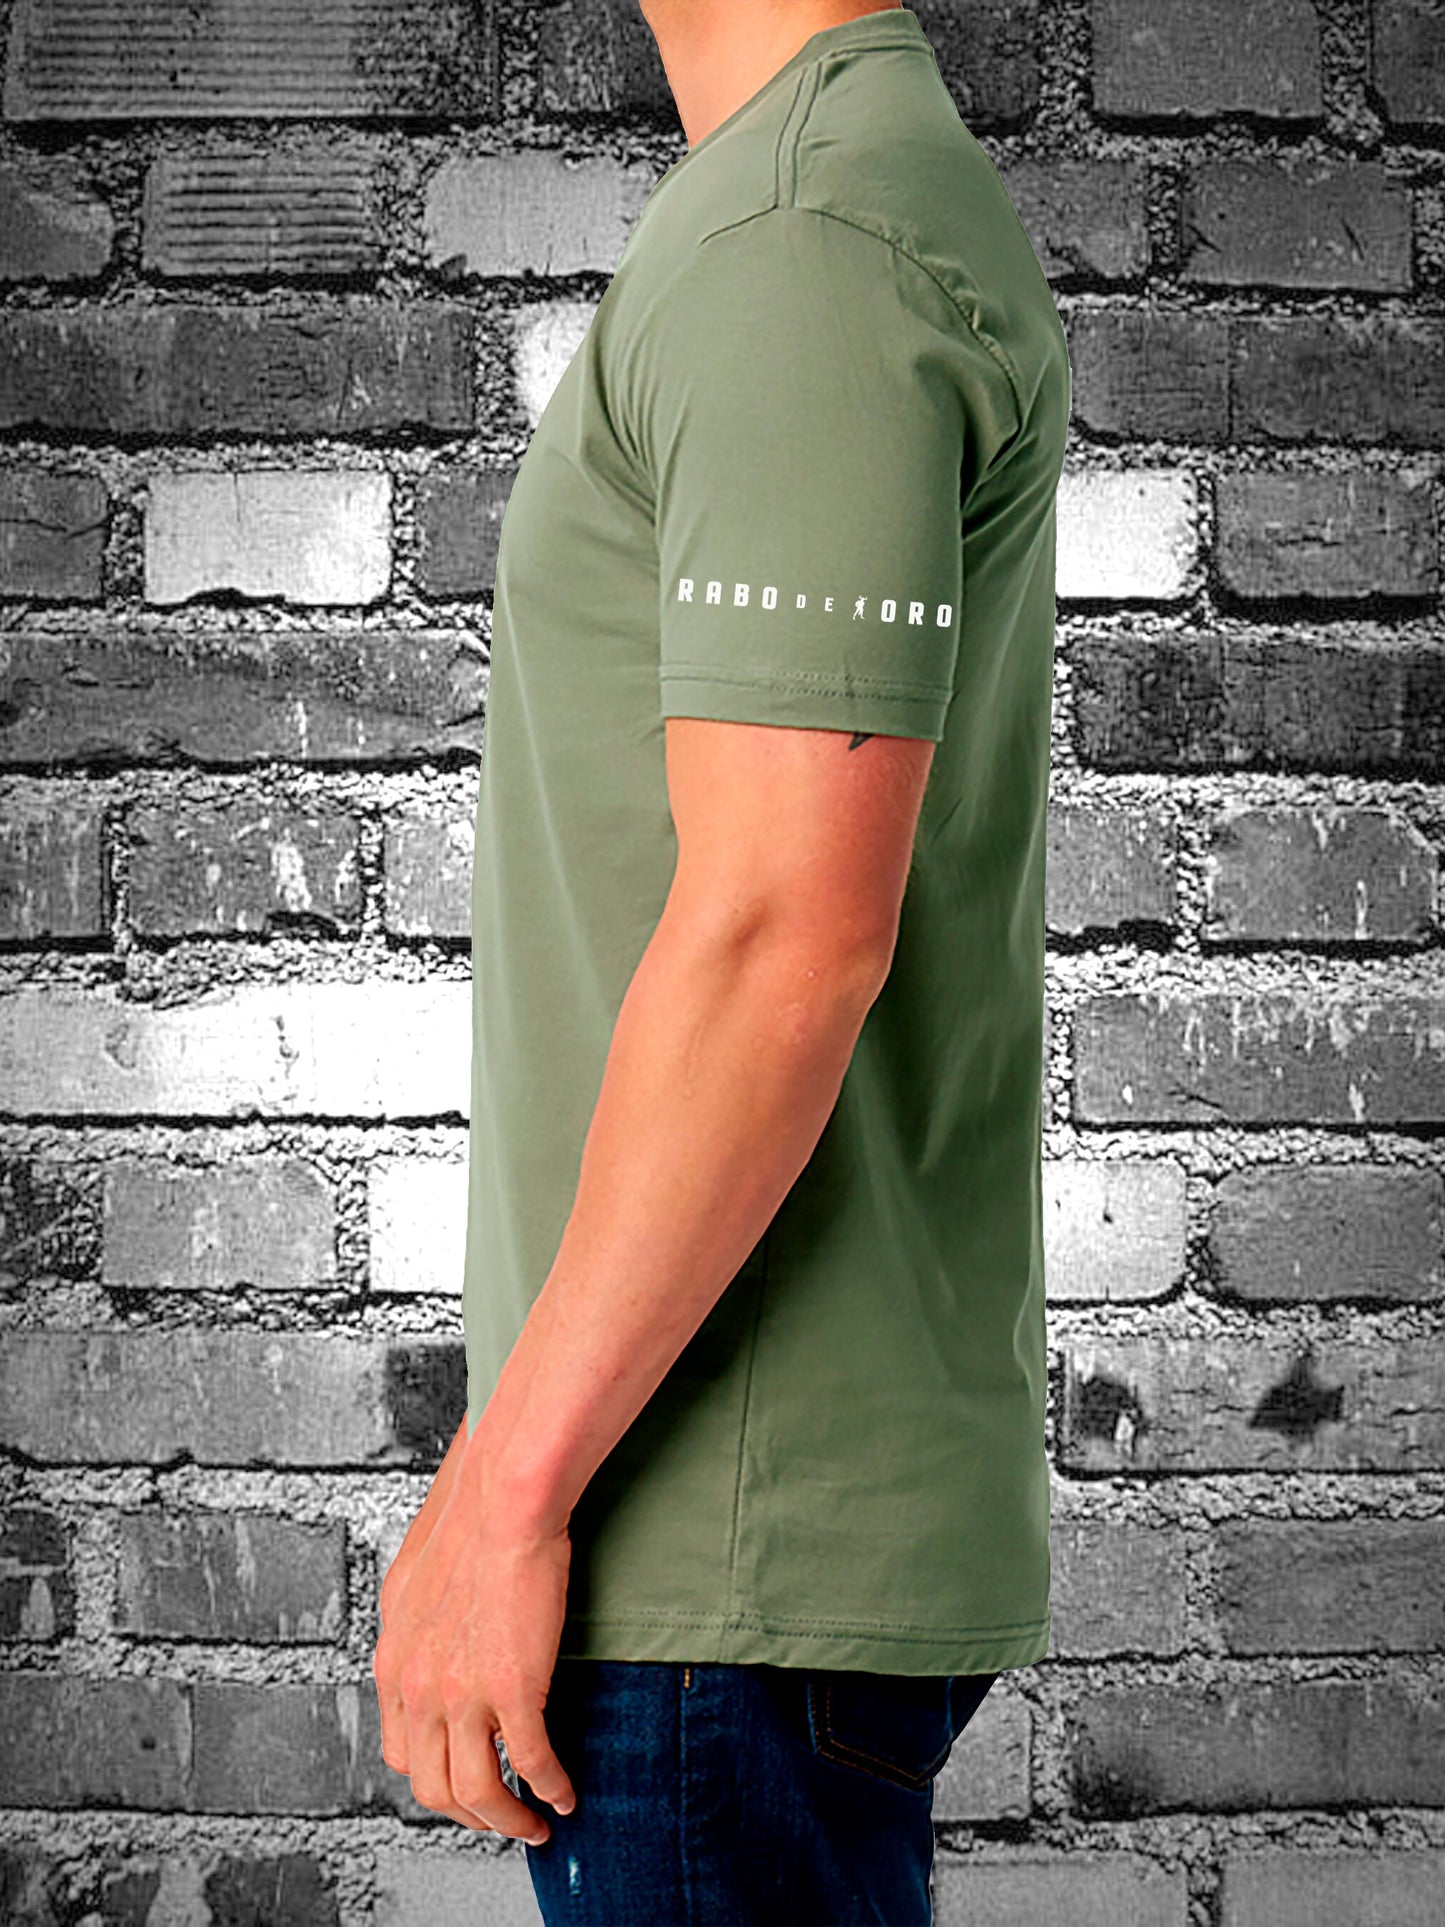 ARMY BEAR Olive T-Shirt with Bear Pride Flag detail